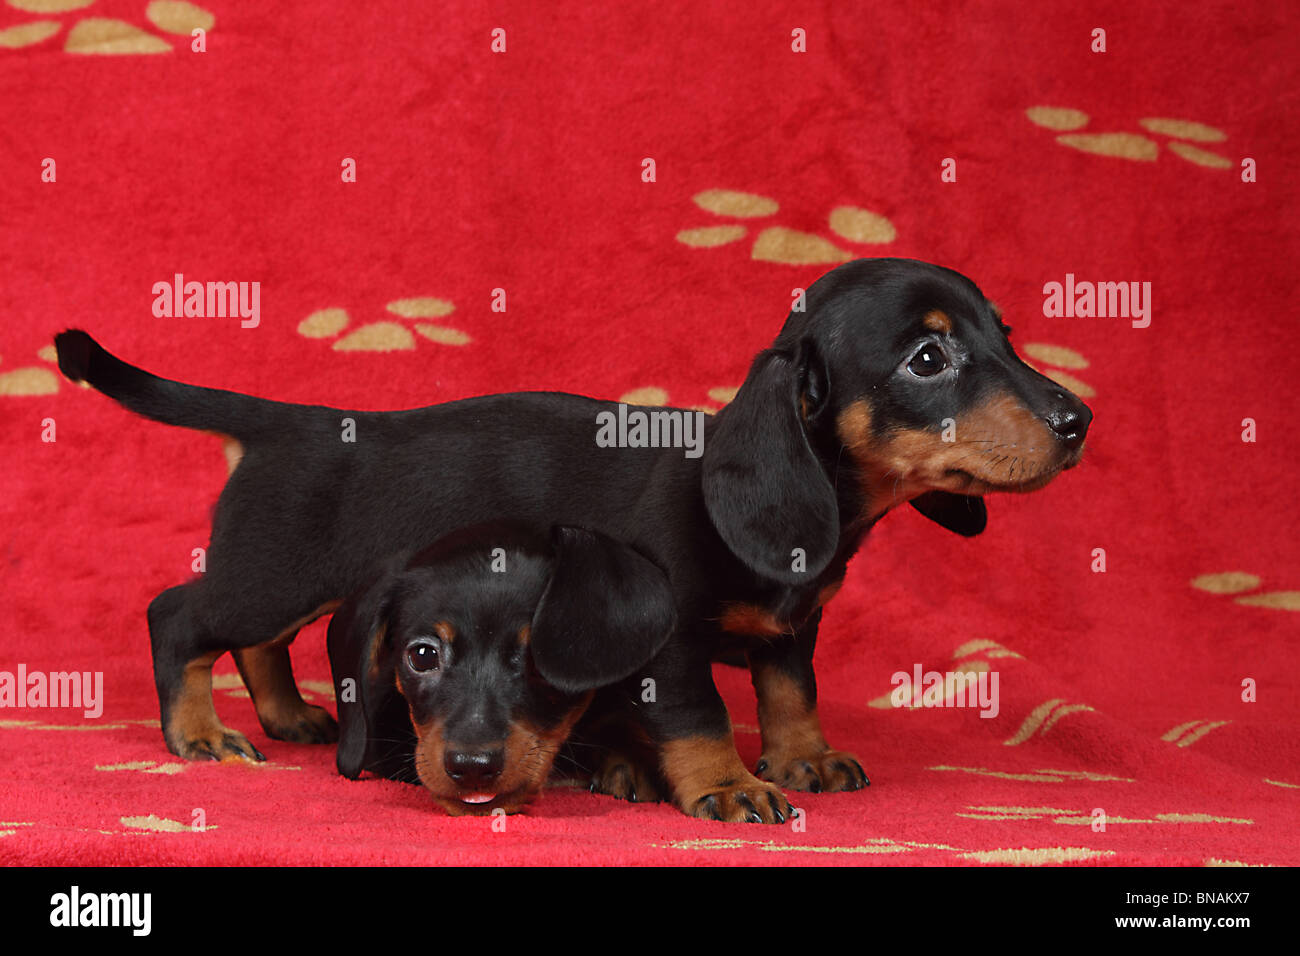 Adorable Dachshund Puppies on a Doggie Blanket Stock Photo